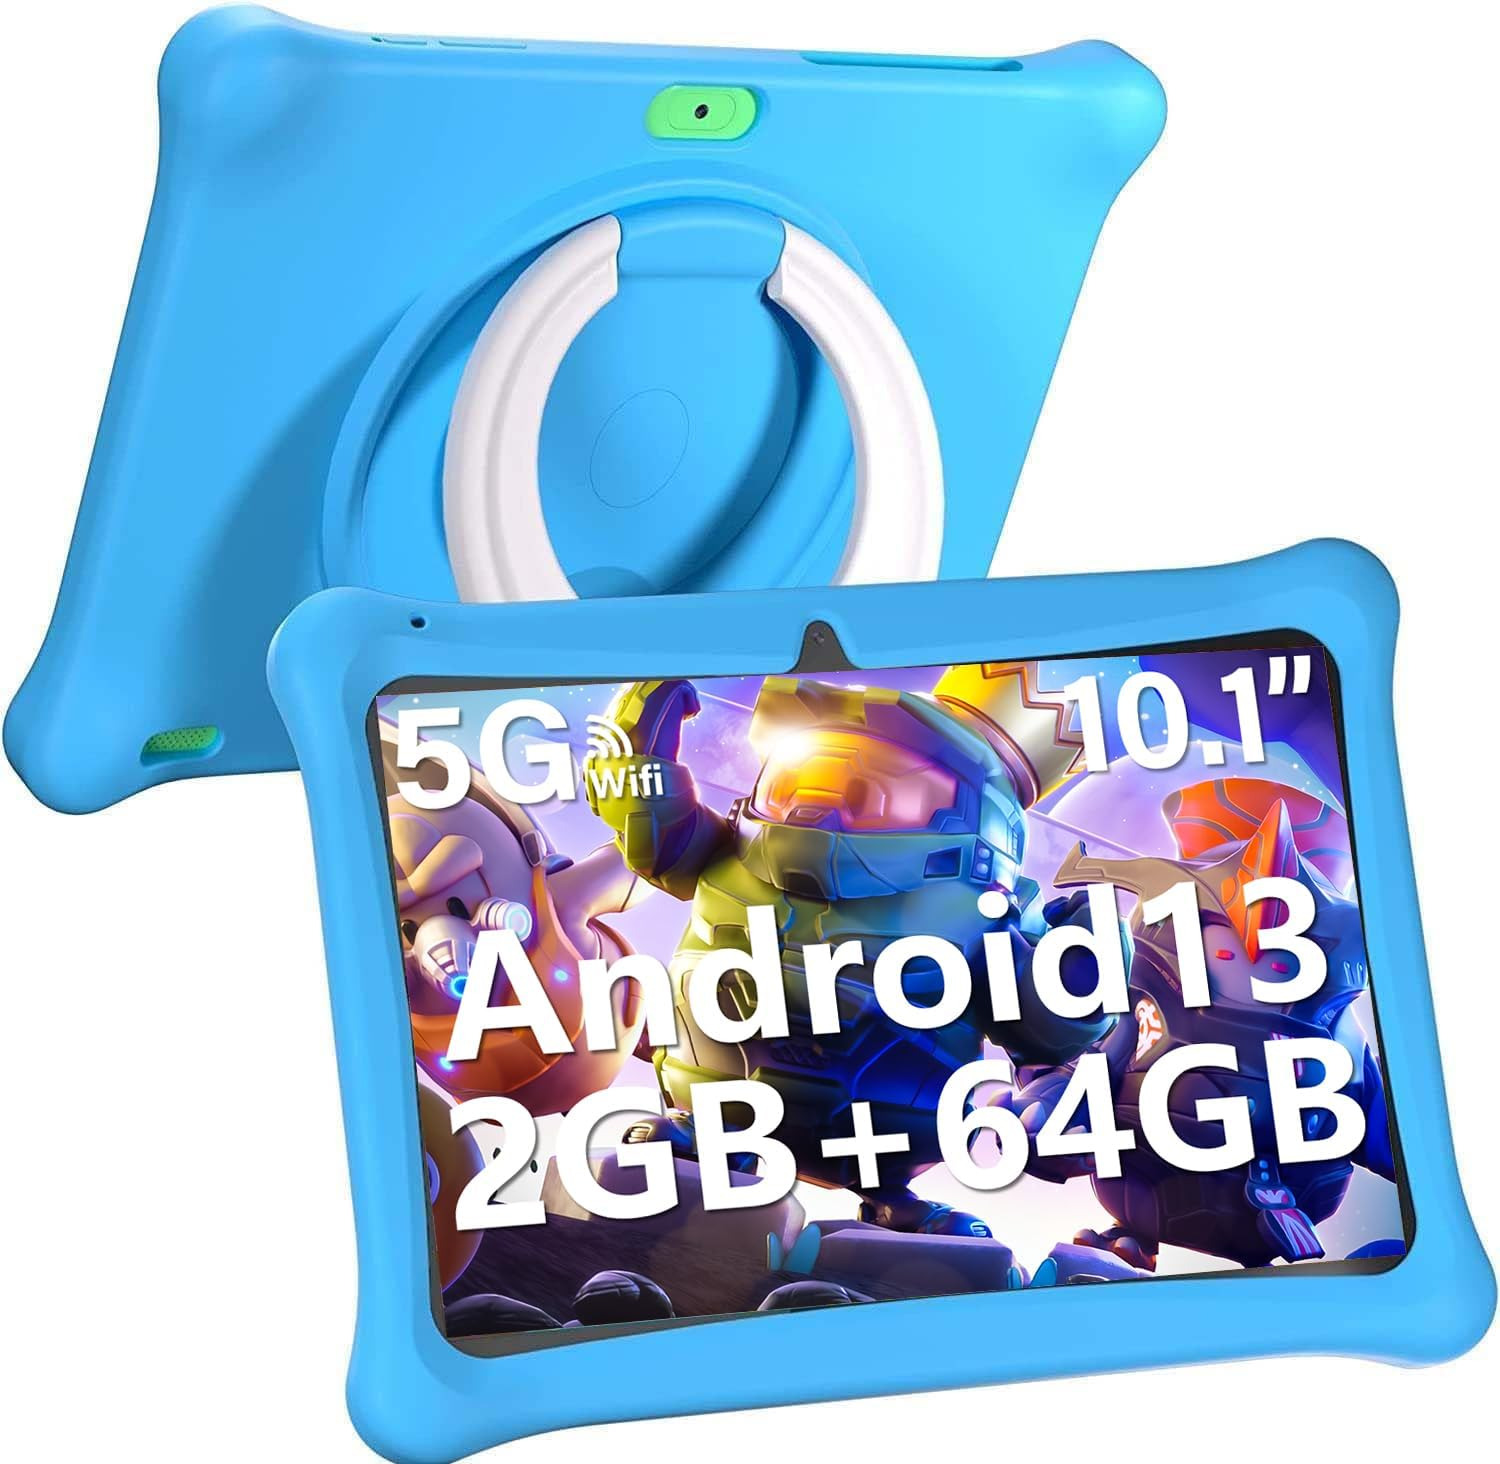 SGIN 10 Inch Tablet for Kids 2+2GB RAM 64GB ROM Android 13 iWawa Pre Installed